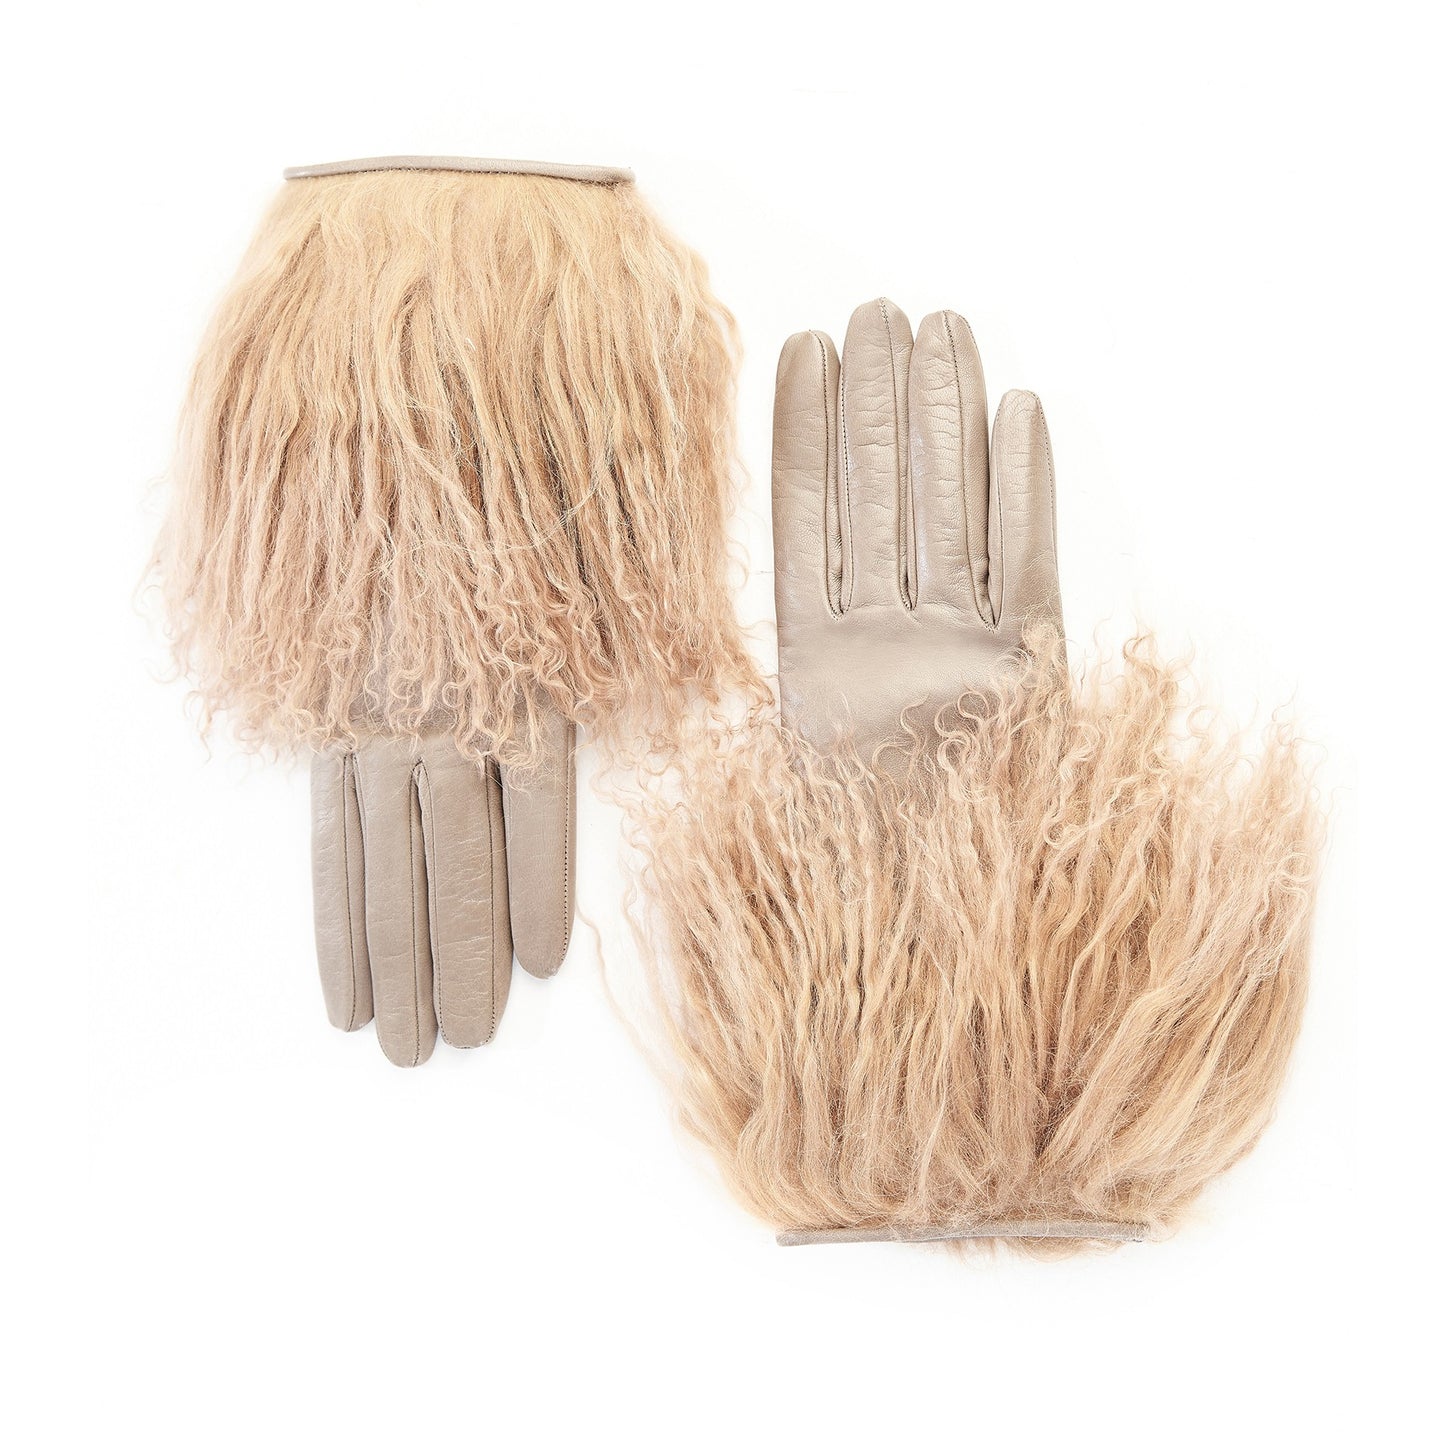 Women's gloves in taupe nappa leather with Mongolian fur (Copia)